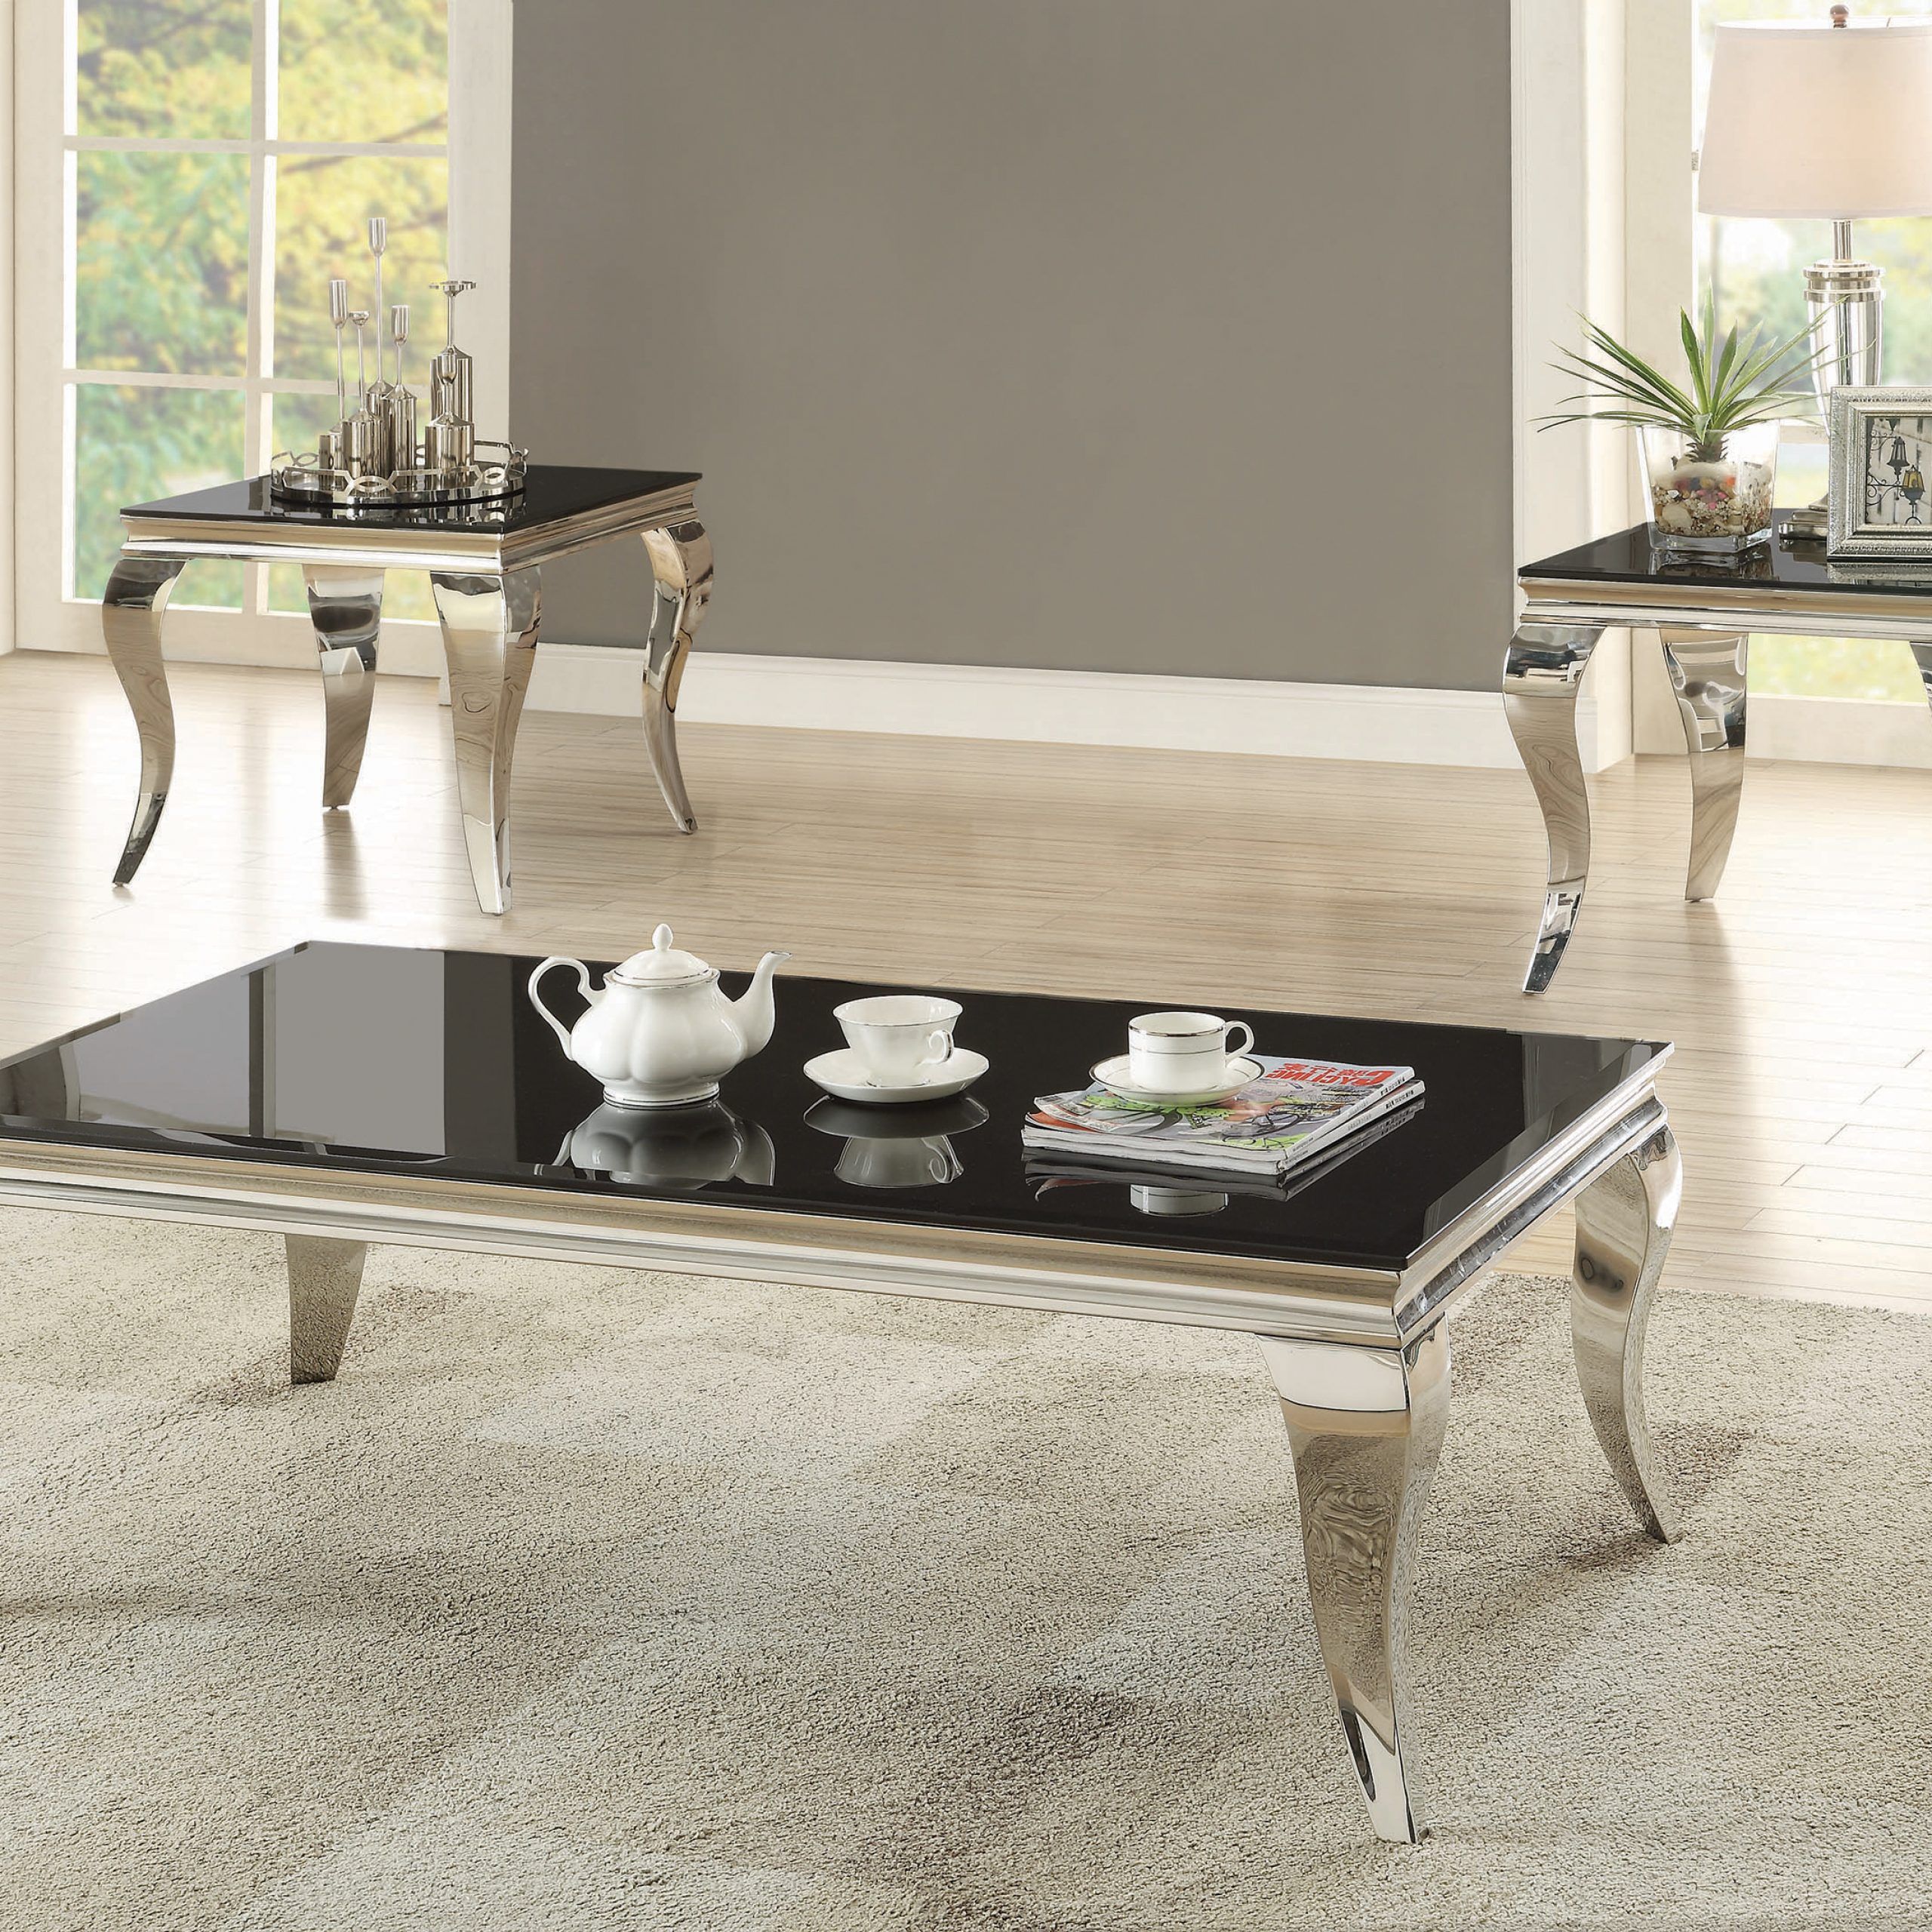 Rectangular Coffee Table Chrome And Black – Coaster Fine Fur Throughout Most Recent Chrome And Glass Rectangular Coffee Tables (Gallery 20 of 20)